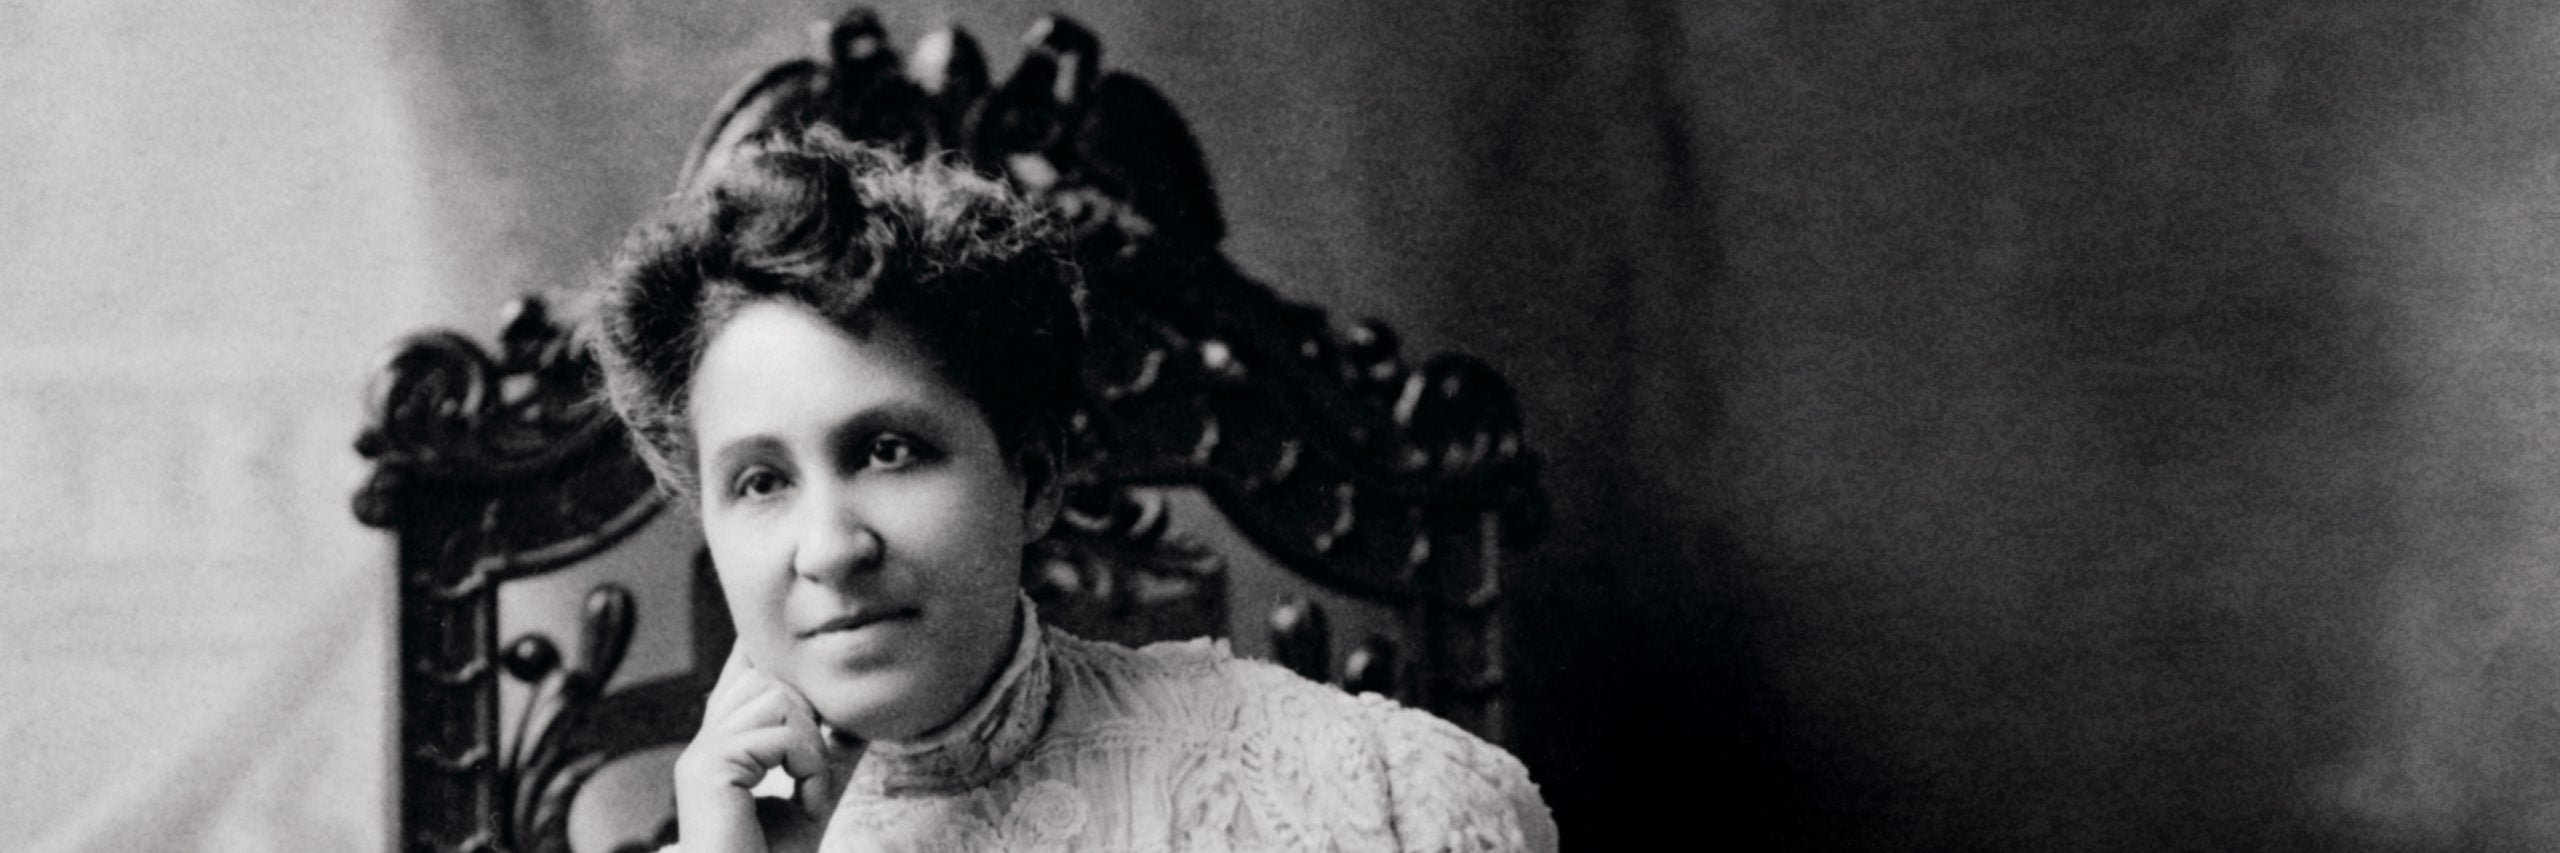 Black Suffragettes: Our Role In The Fight For Women's Right To Vote